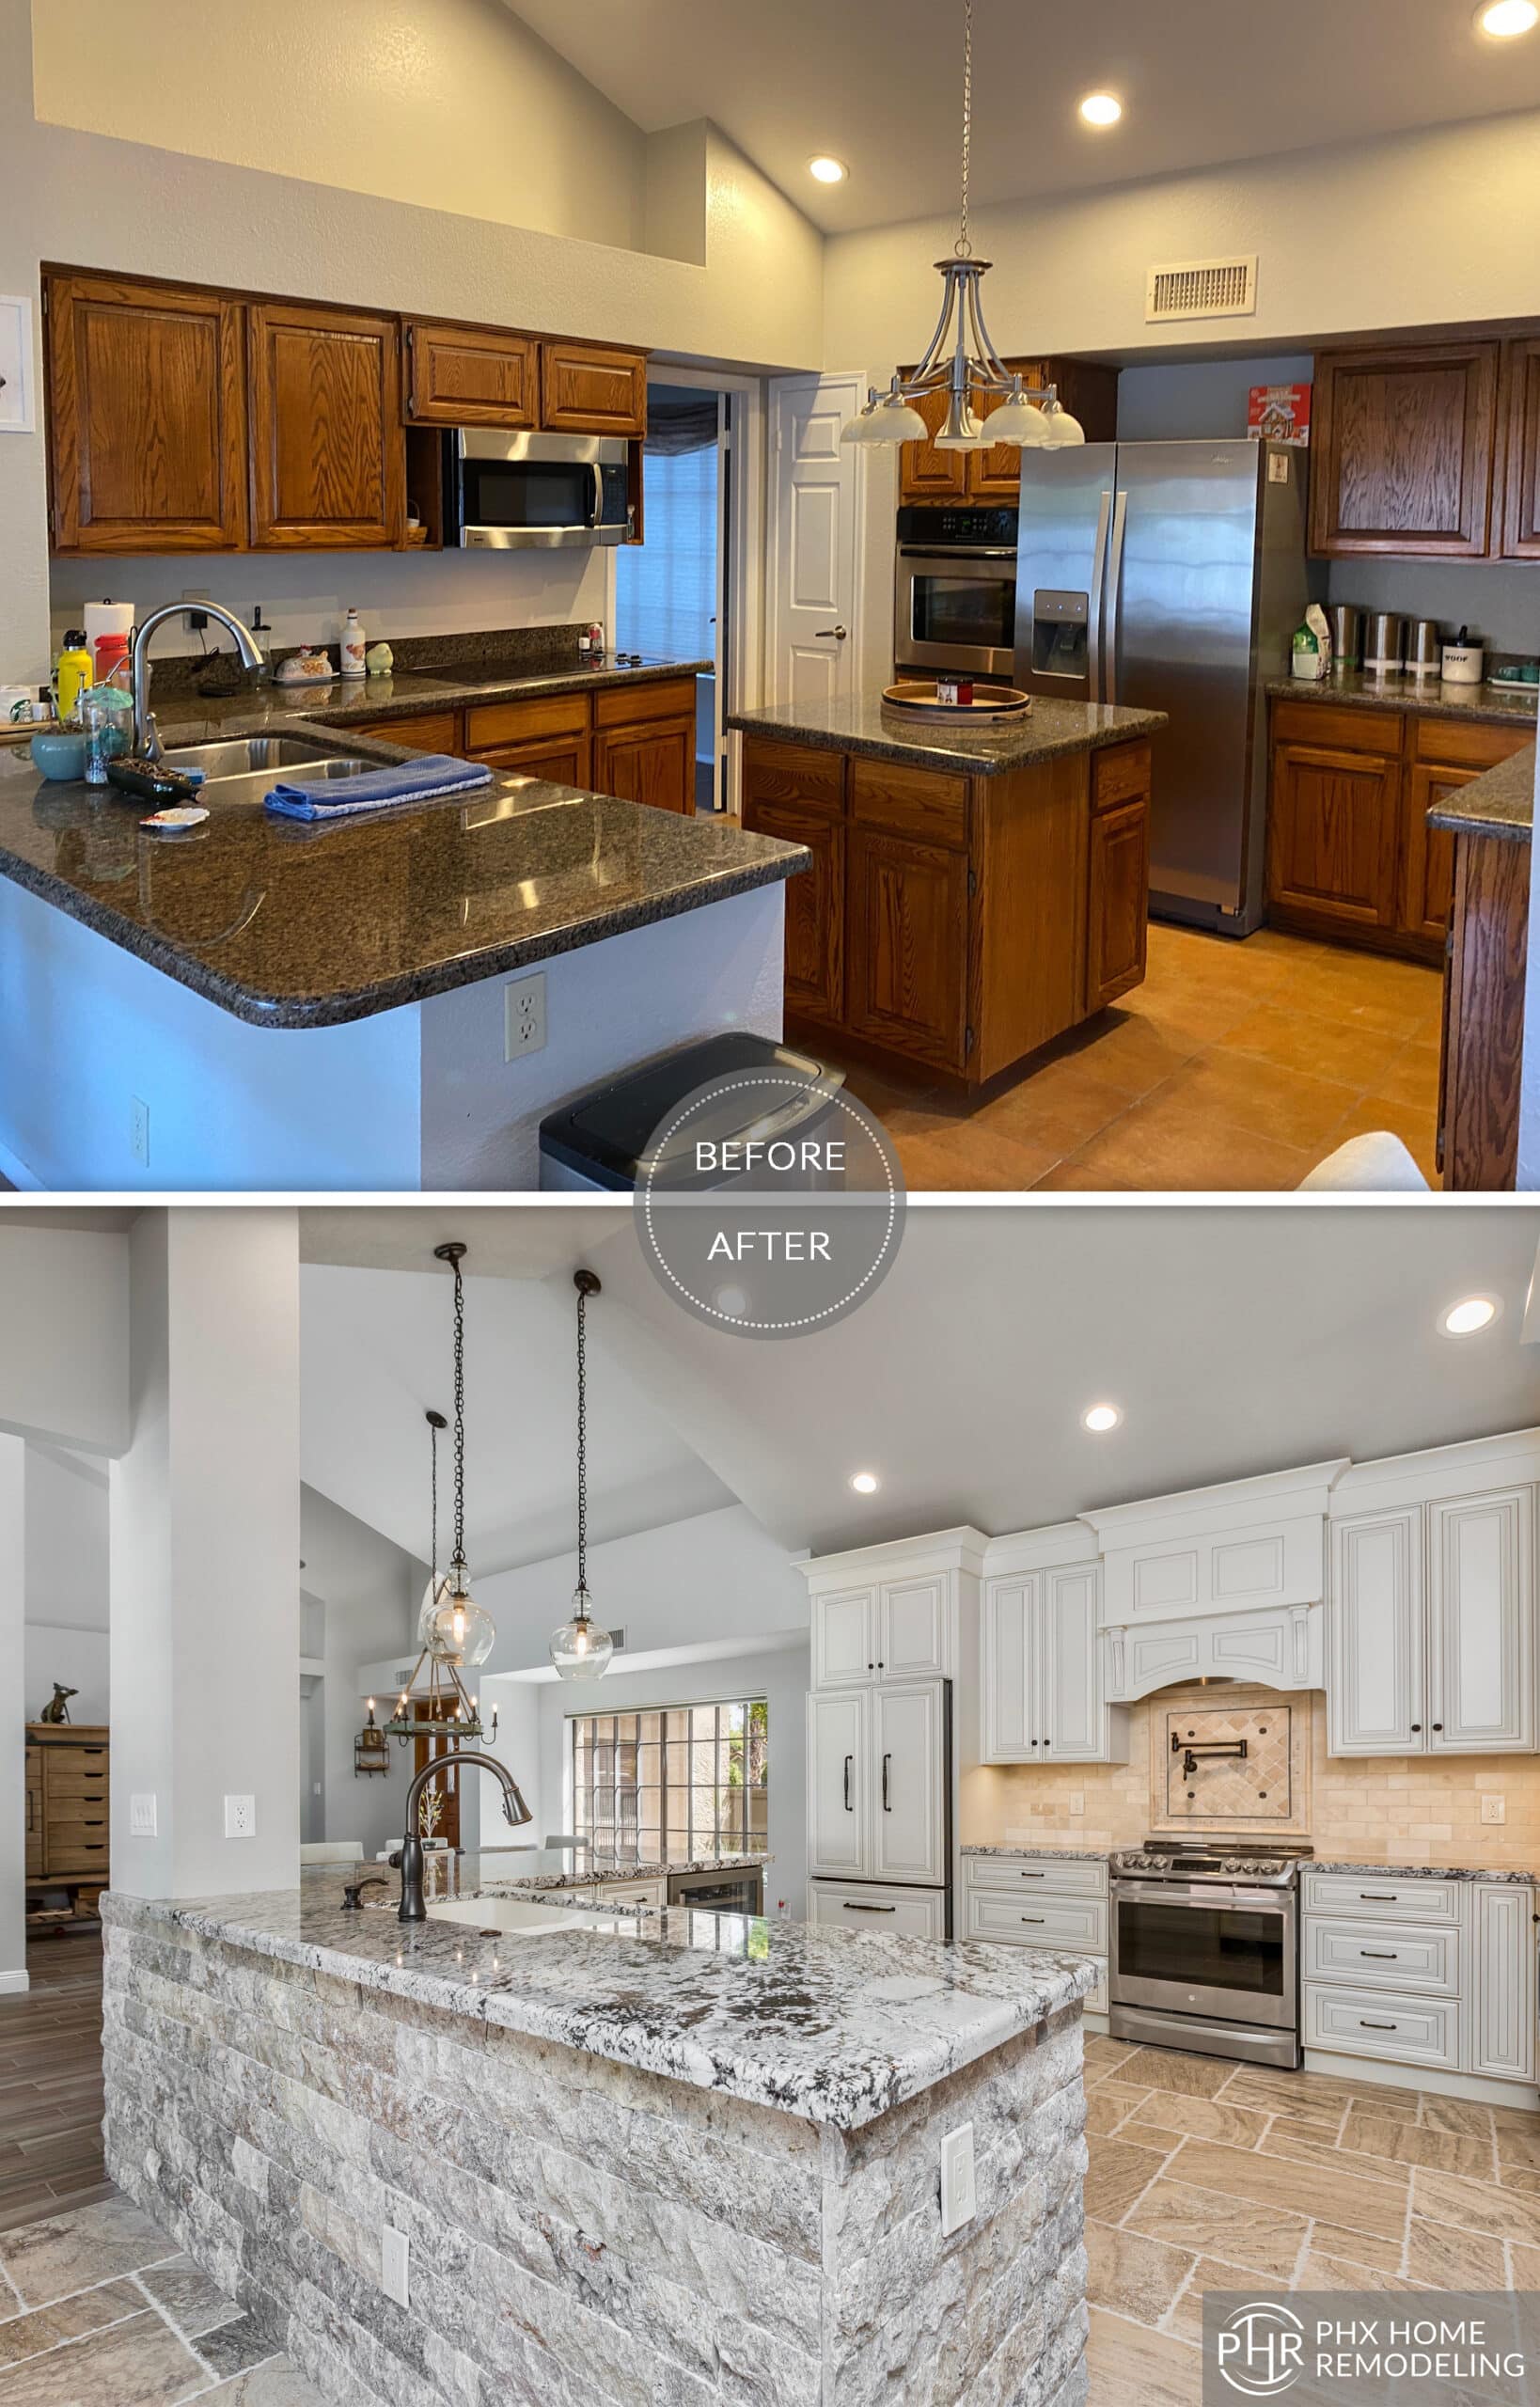 Remarkable Changes Made To A Kitchen Through A Remodel, Highlighting The Beautiful New Cabinets And Countertops